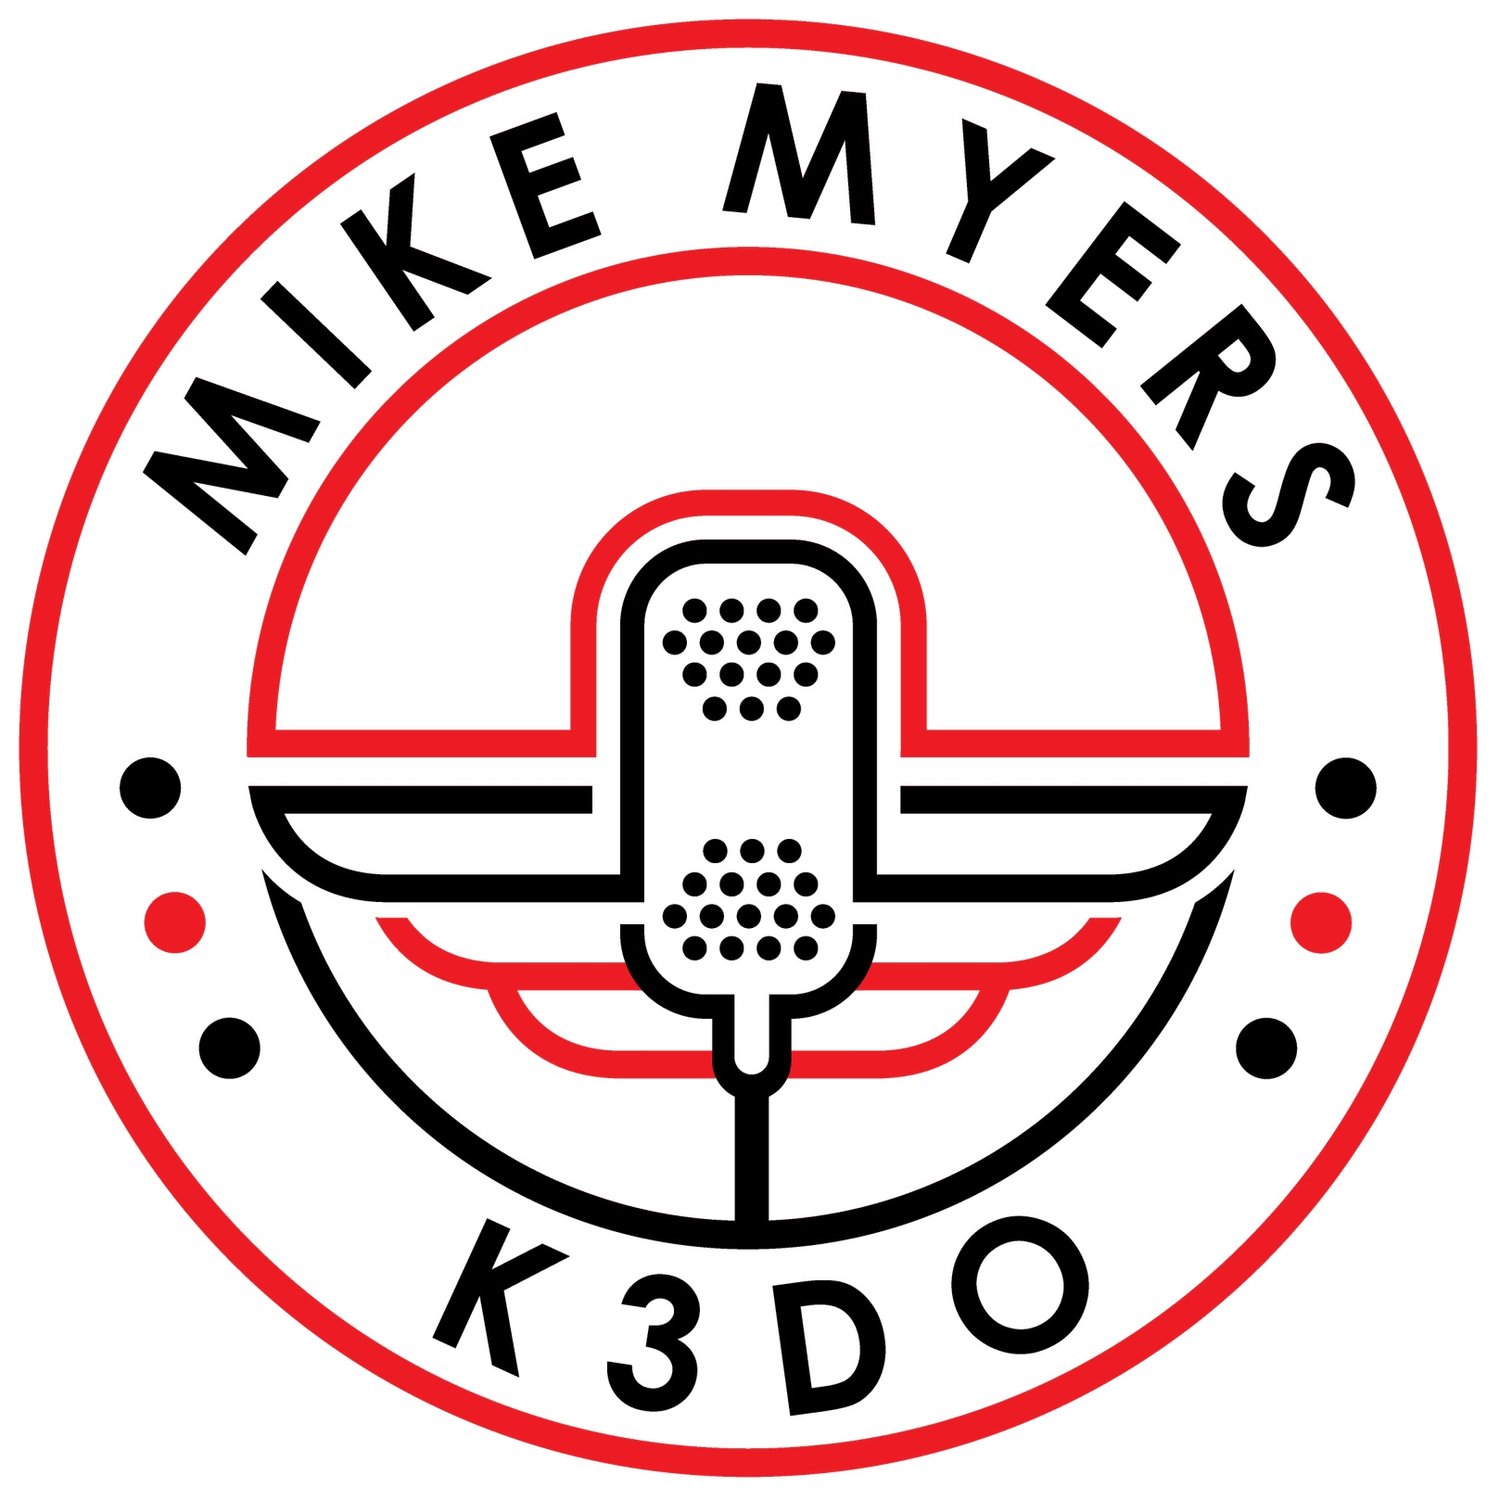 Mike Myers (K3DO)